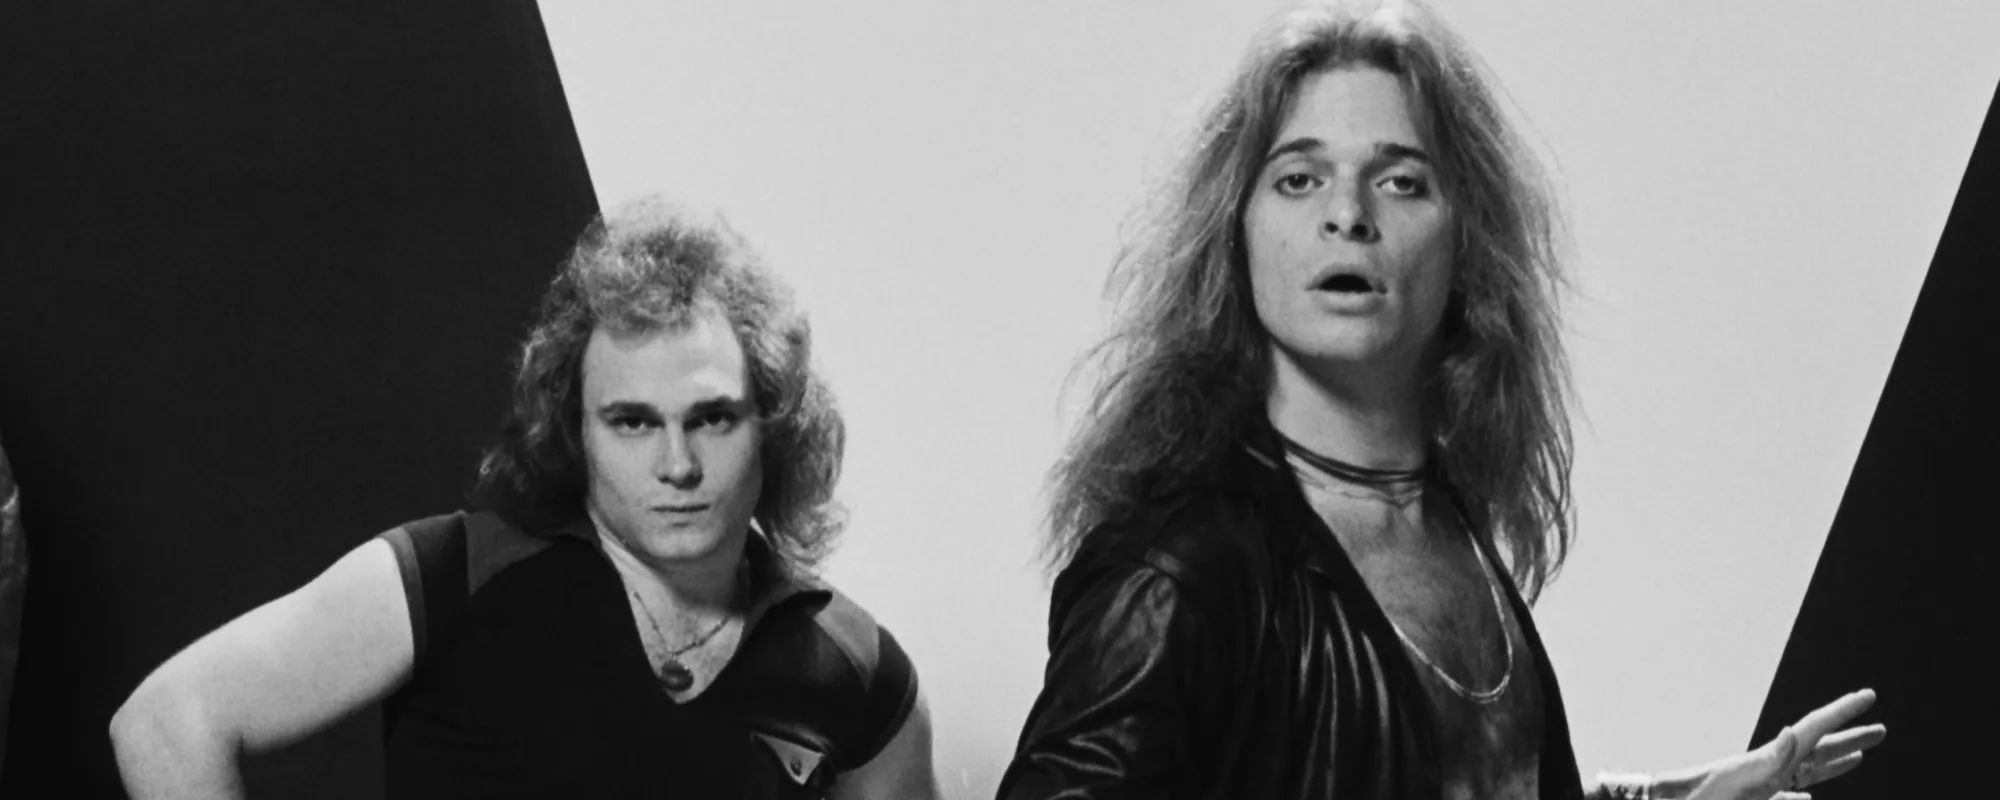 Michael Anthony Hasn’t Spoken to David Lee Roth “in Quite Some Time,” Calls Ex-Van Halen Bandmate “Kind of a Crazy Guy”